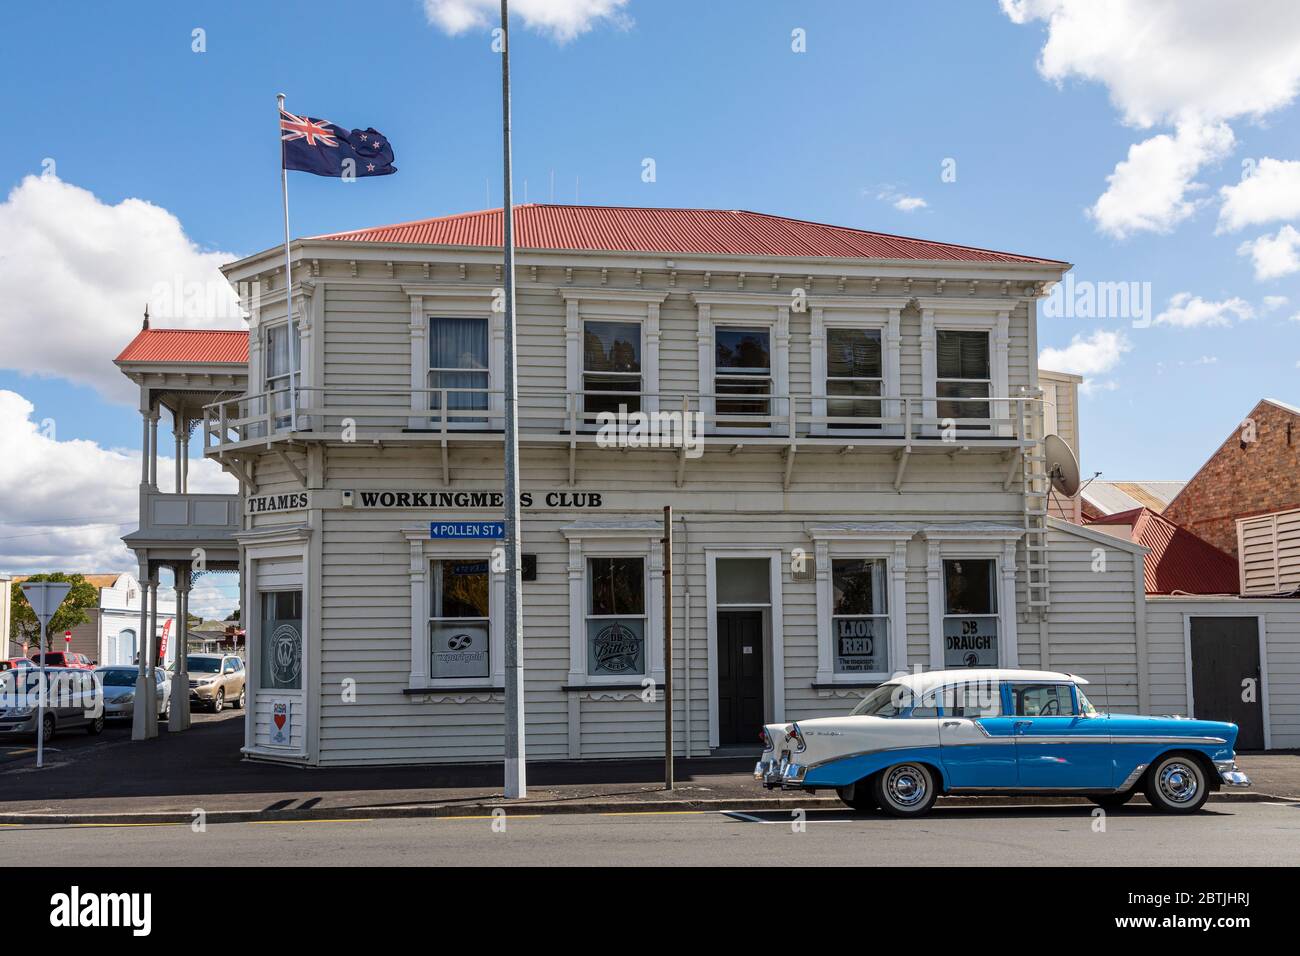 A 1950s Chevrolet Bel Air parked outside the Thames Workingmens Club, Pollen Street, Thames, Waikato, North Island, New Zealand Stock Photo